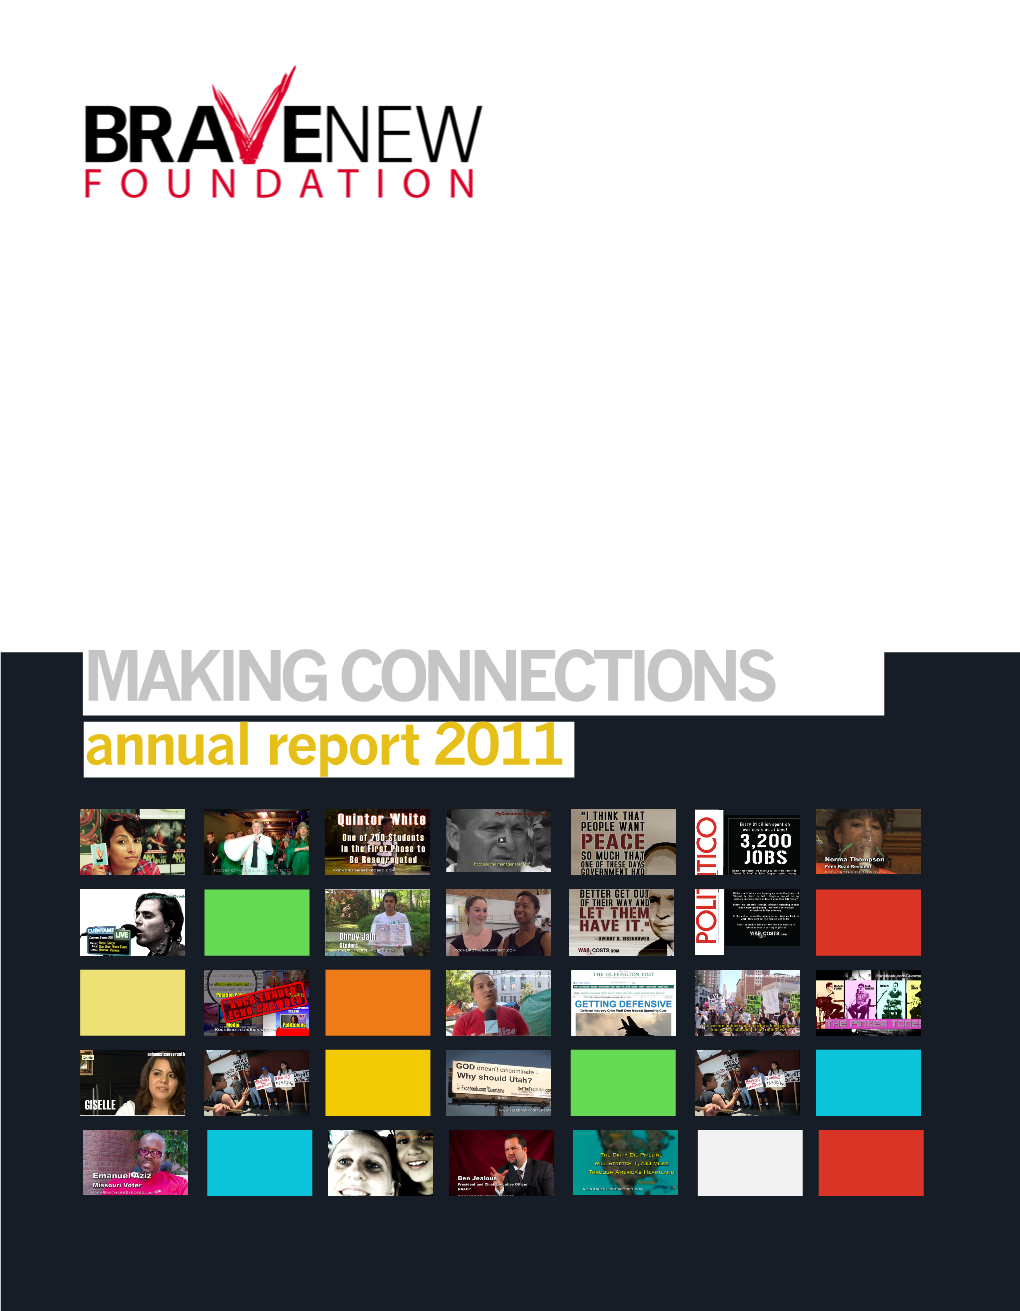 MAKING CONNECTIONS Annual Report 2011